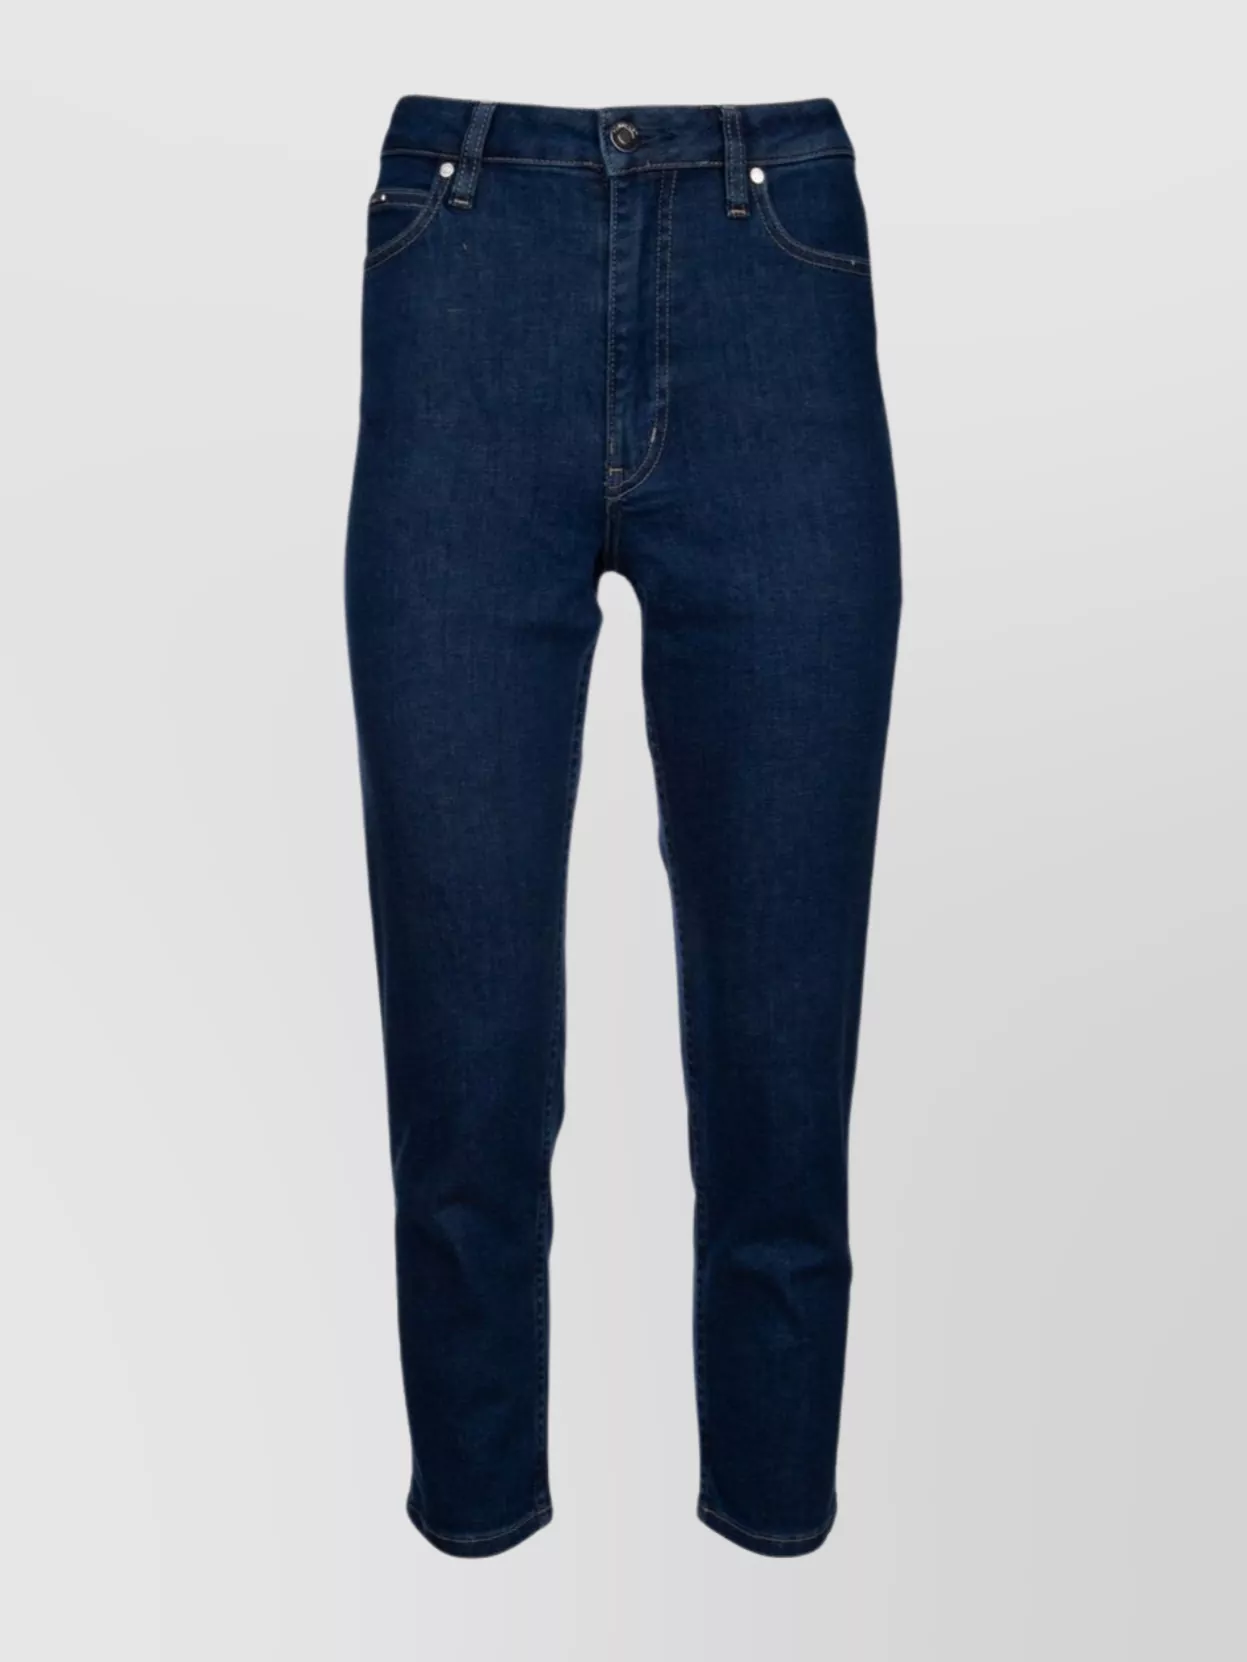 Shop Calvin Klein Denim Trousers With Belt Loops And Five-pocket Design